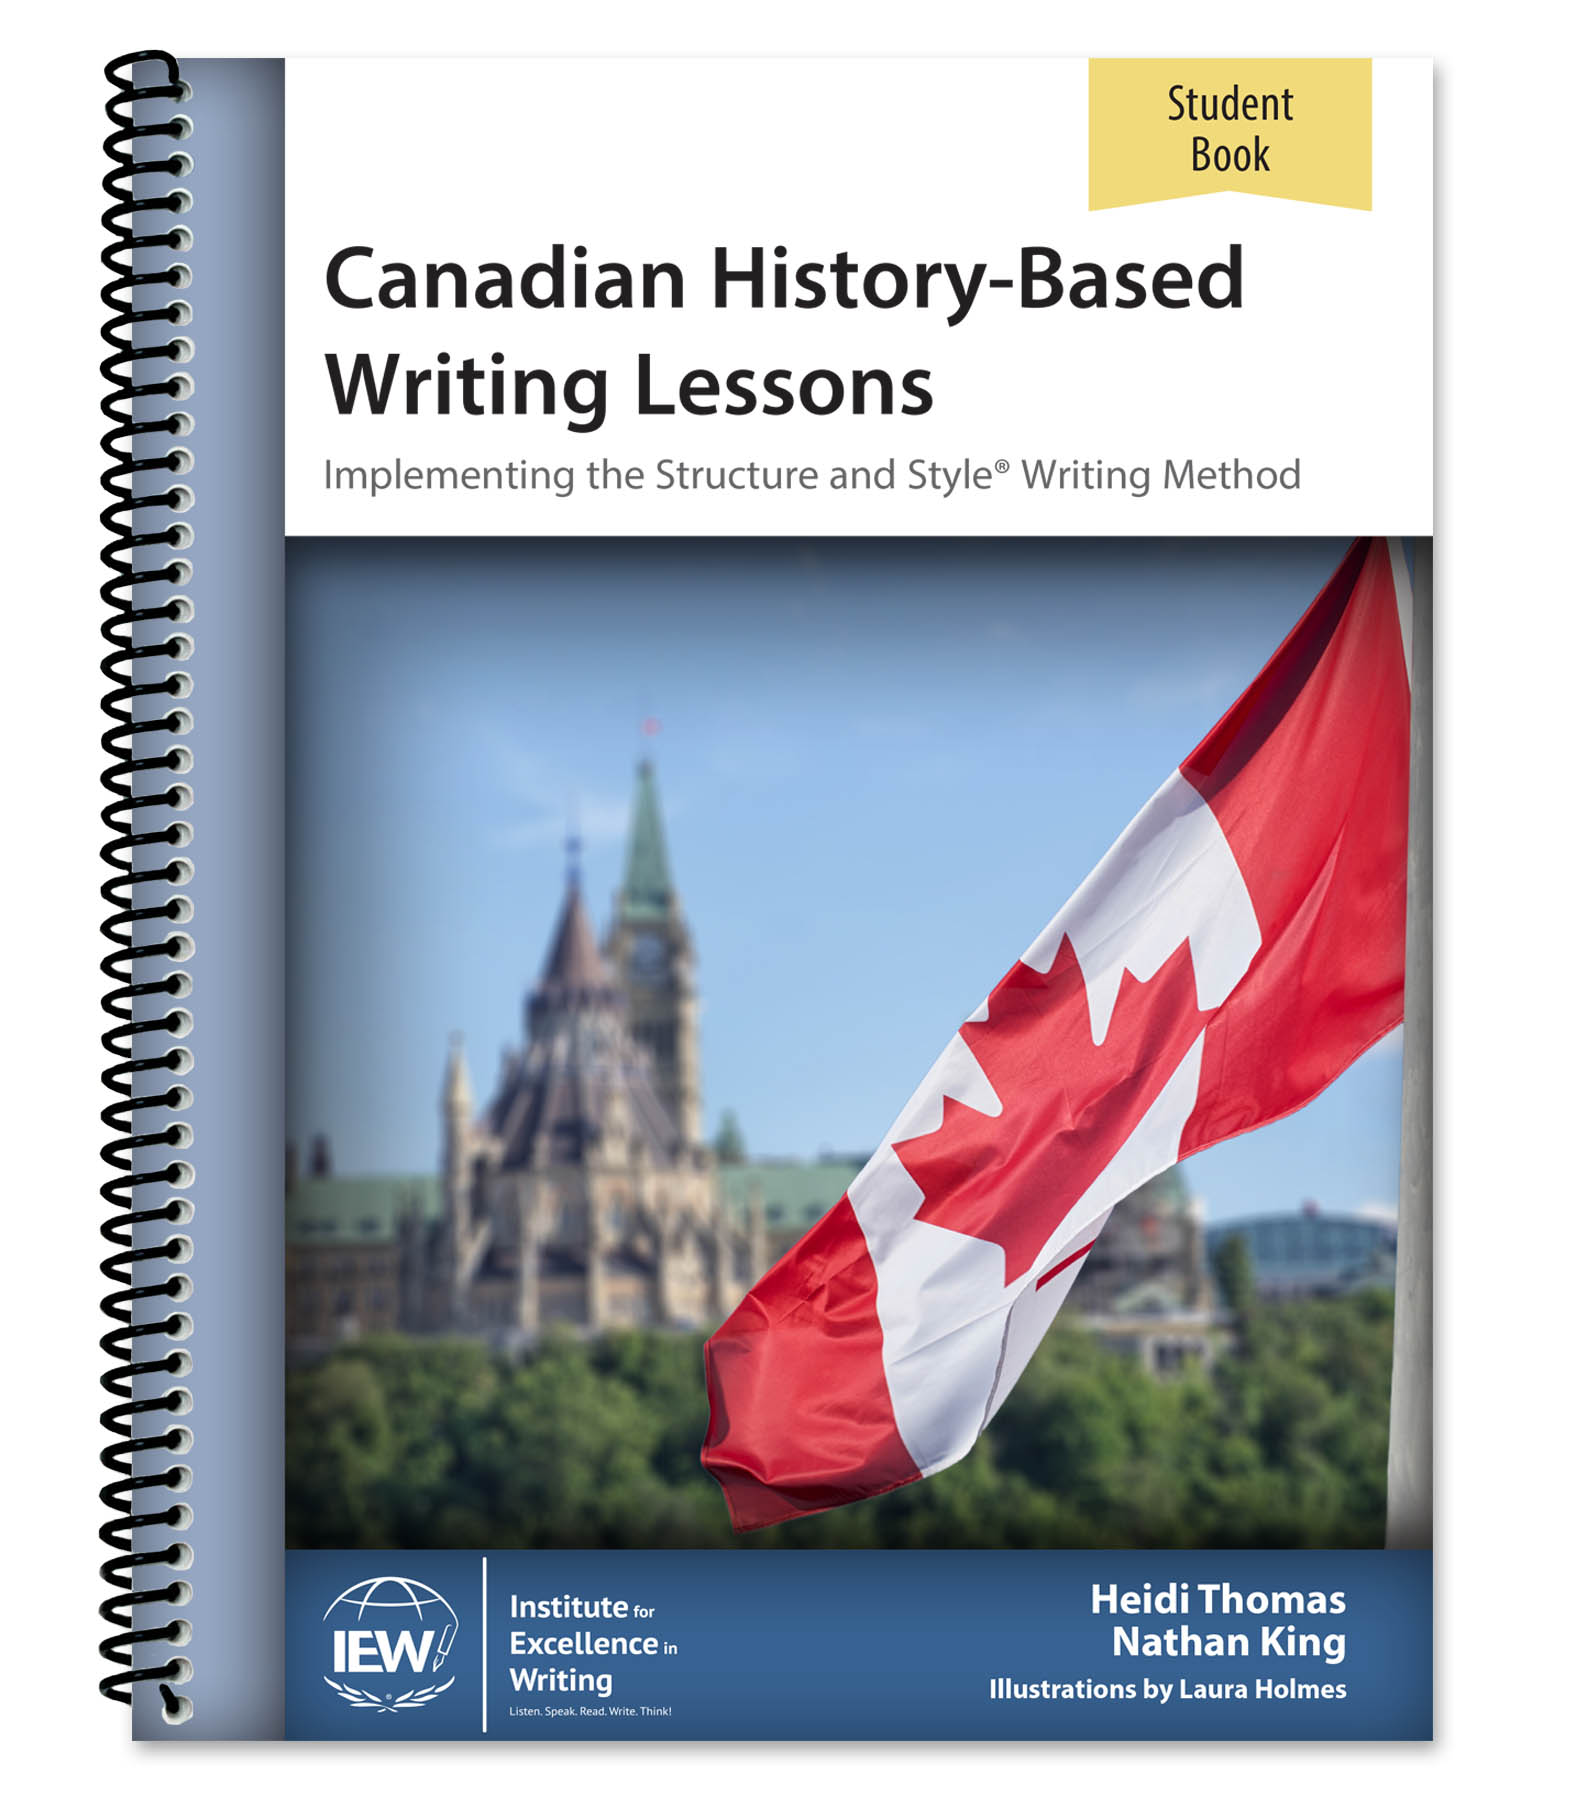 Canadian History-Based Writing Lessons [Student Book only]